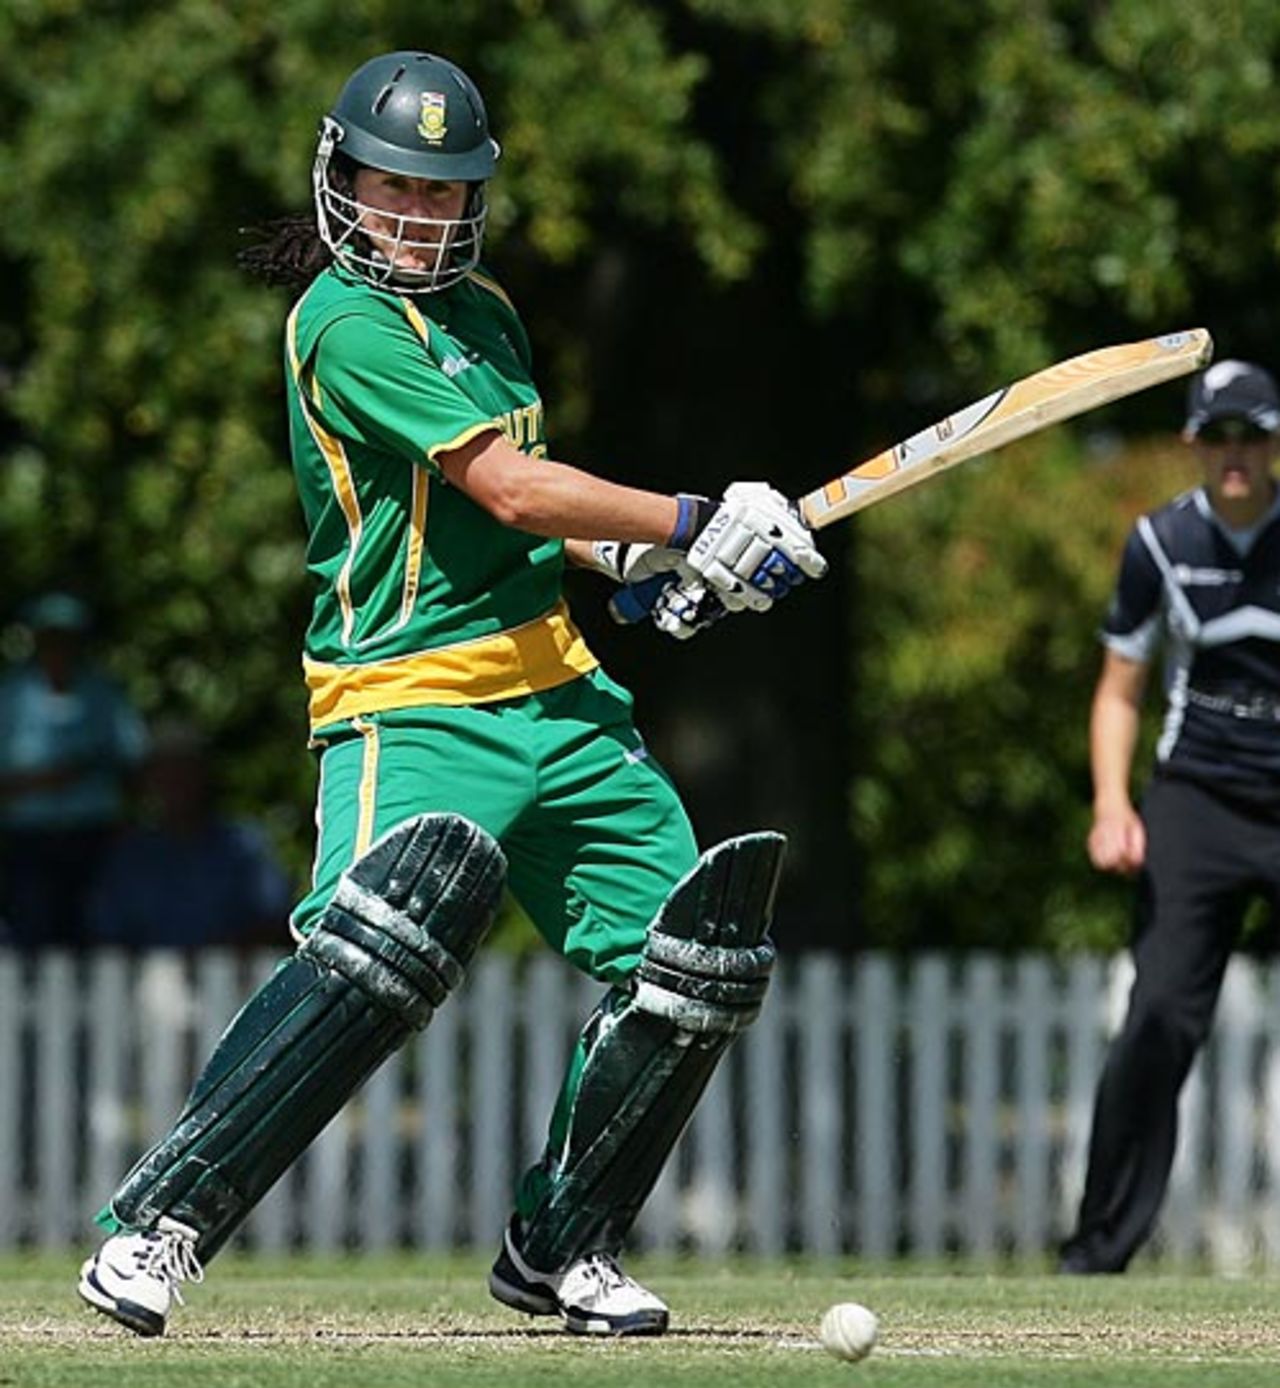 Cri-Zelda Brits cuts, New Zealand v South Africa, Group A, women's World Cup, Bradman Oval, Bowral, March 12, 2009